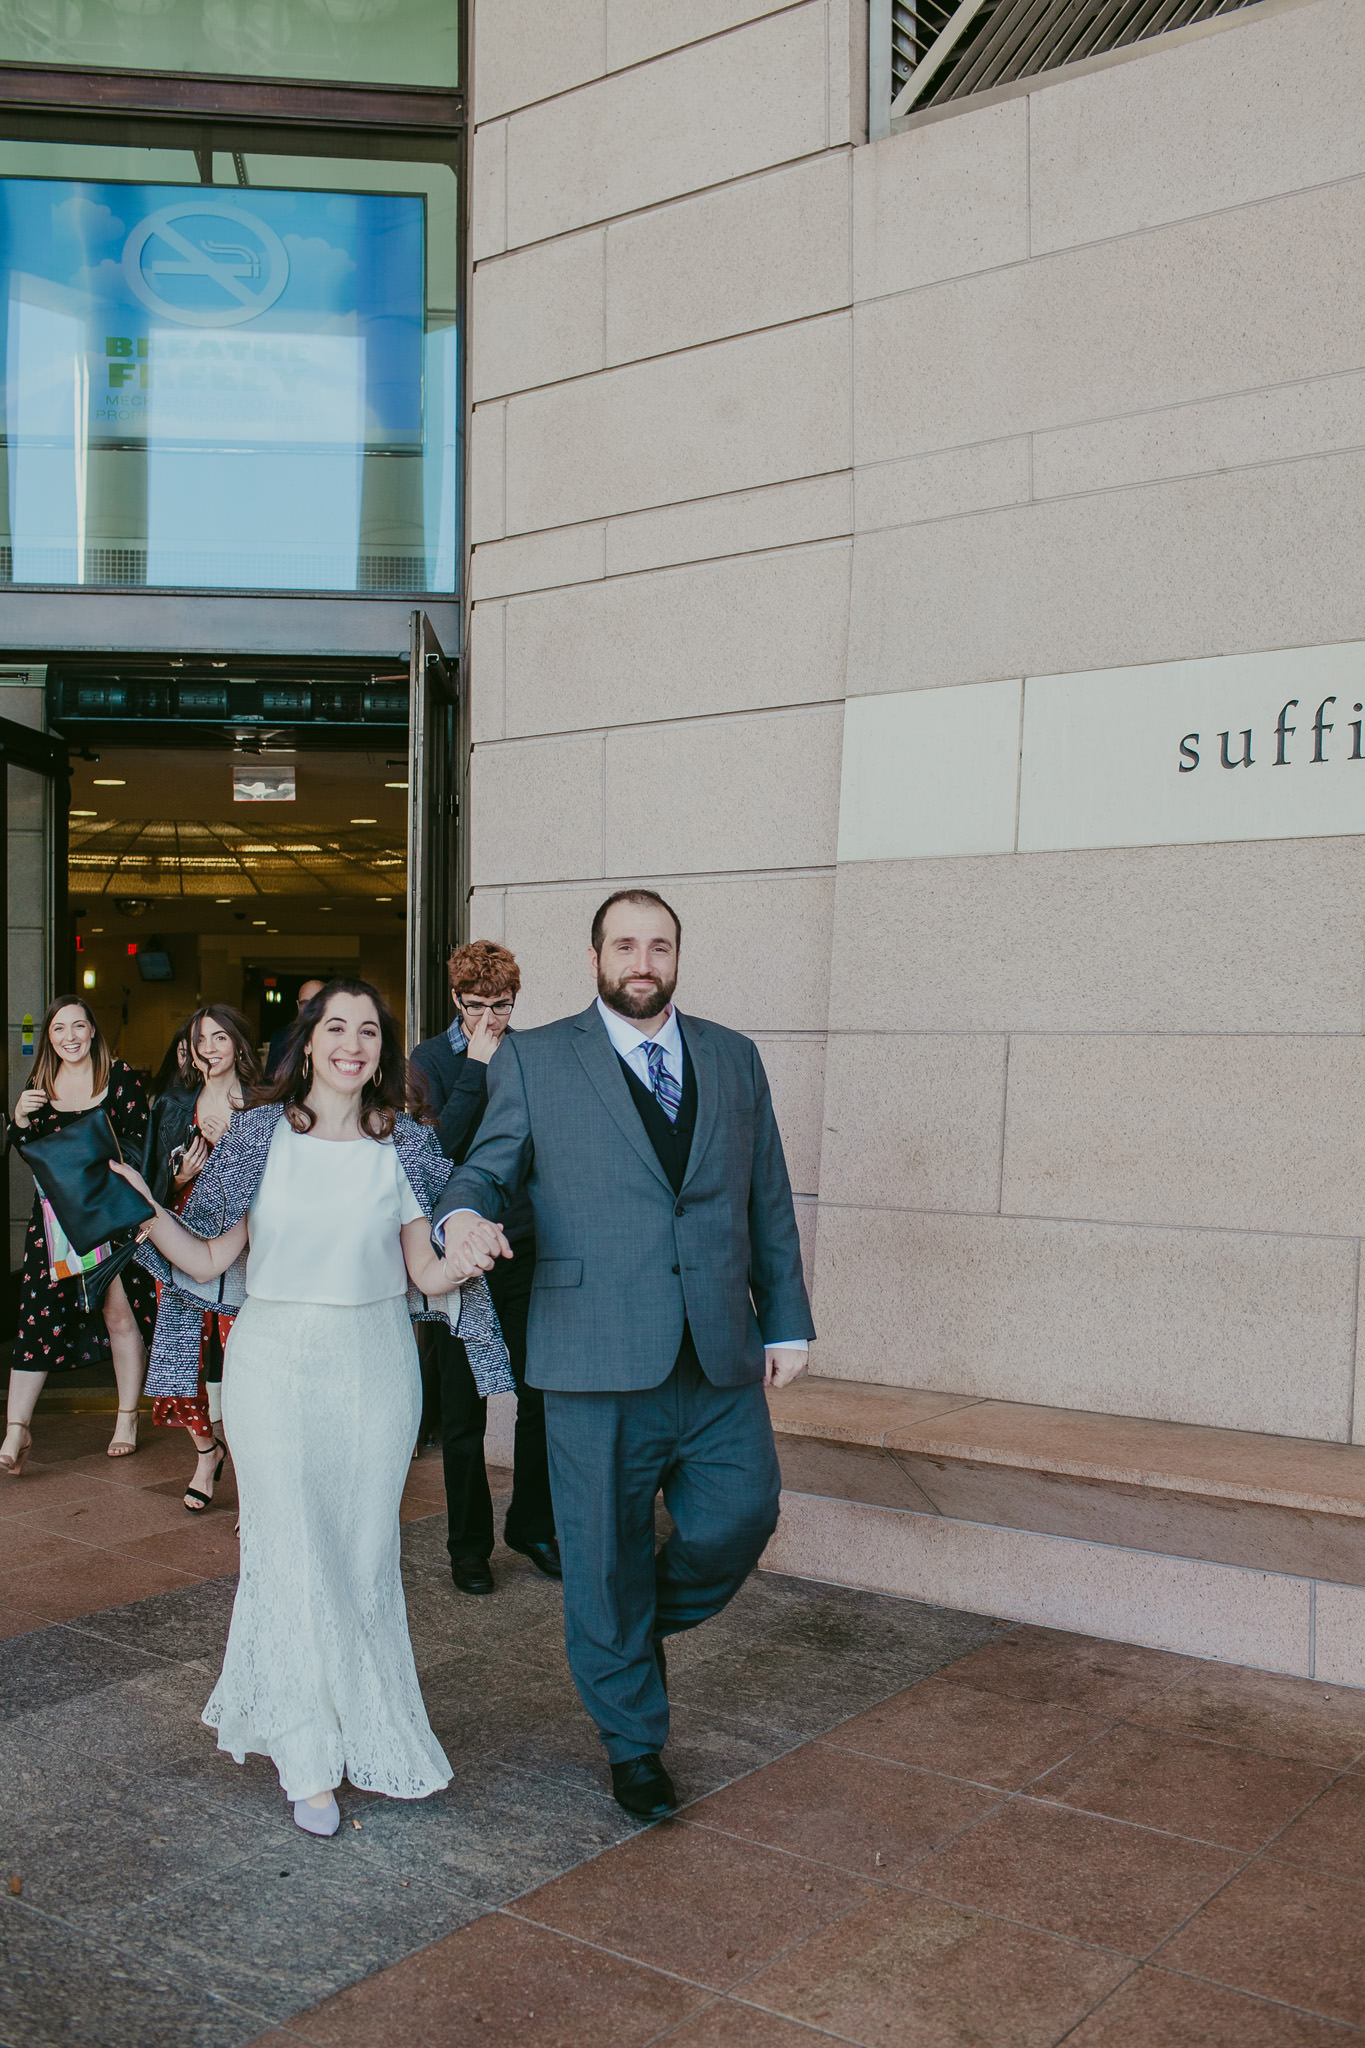 Newlyweds leave the mecklenburg county courthouse as husband and wife